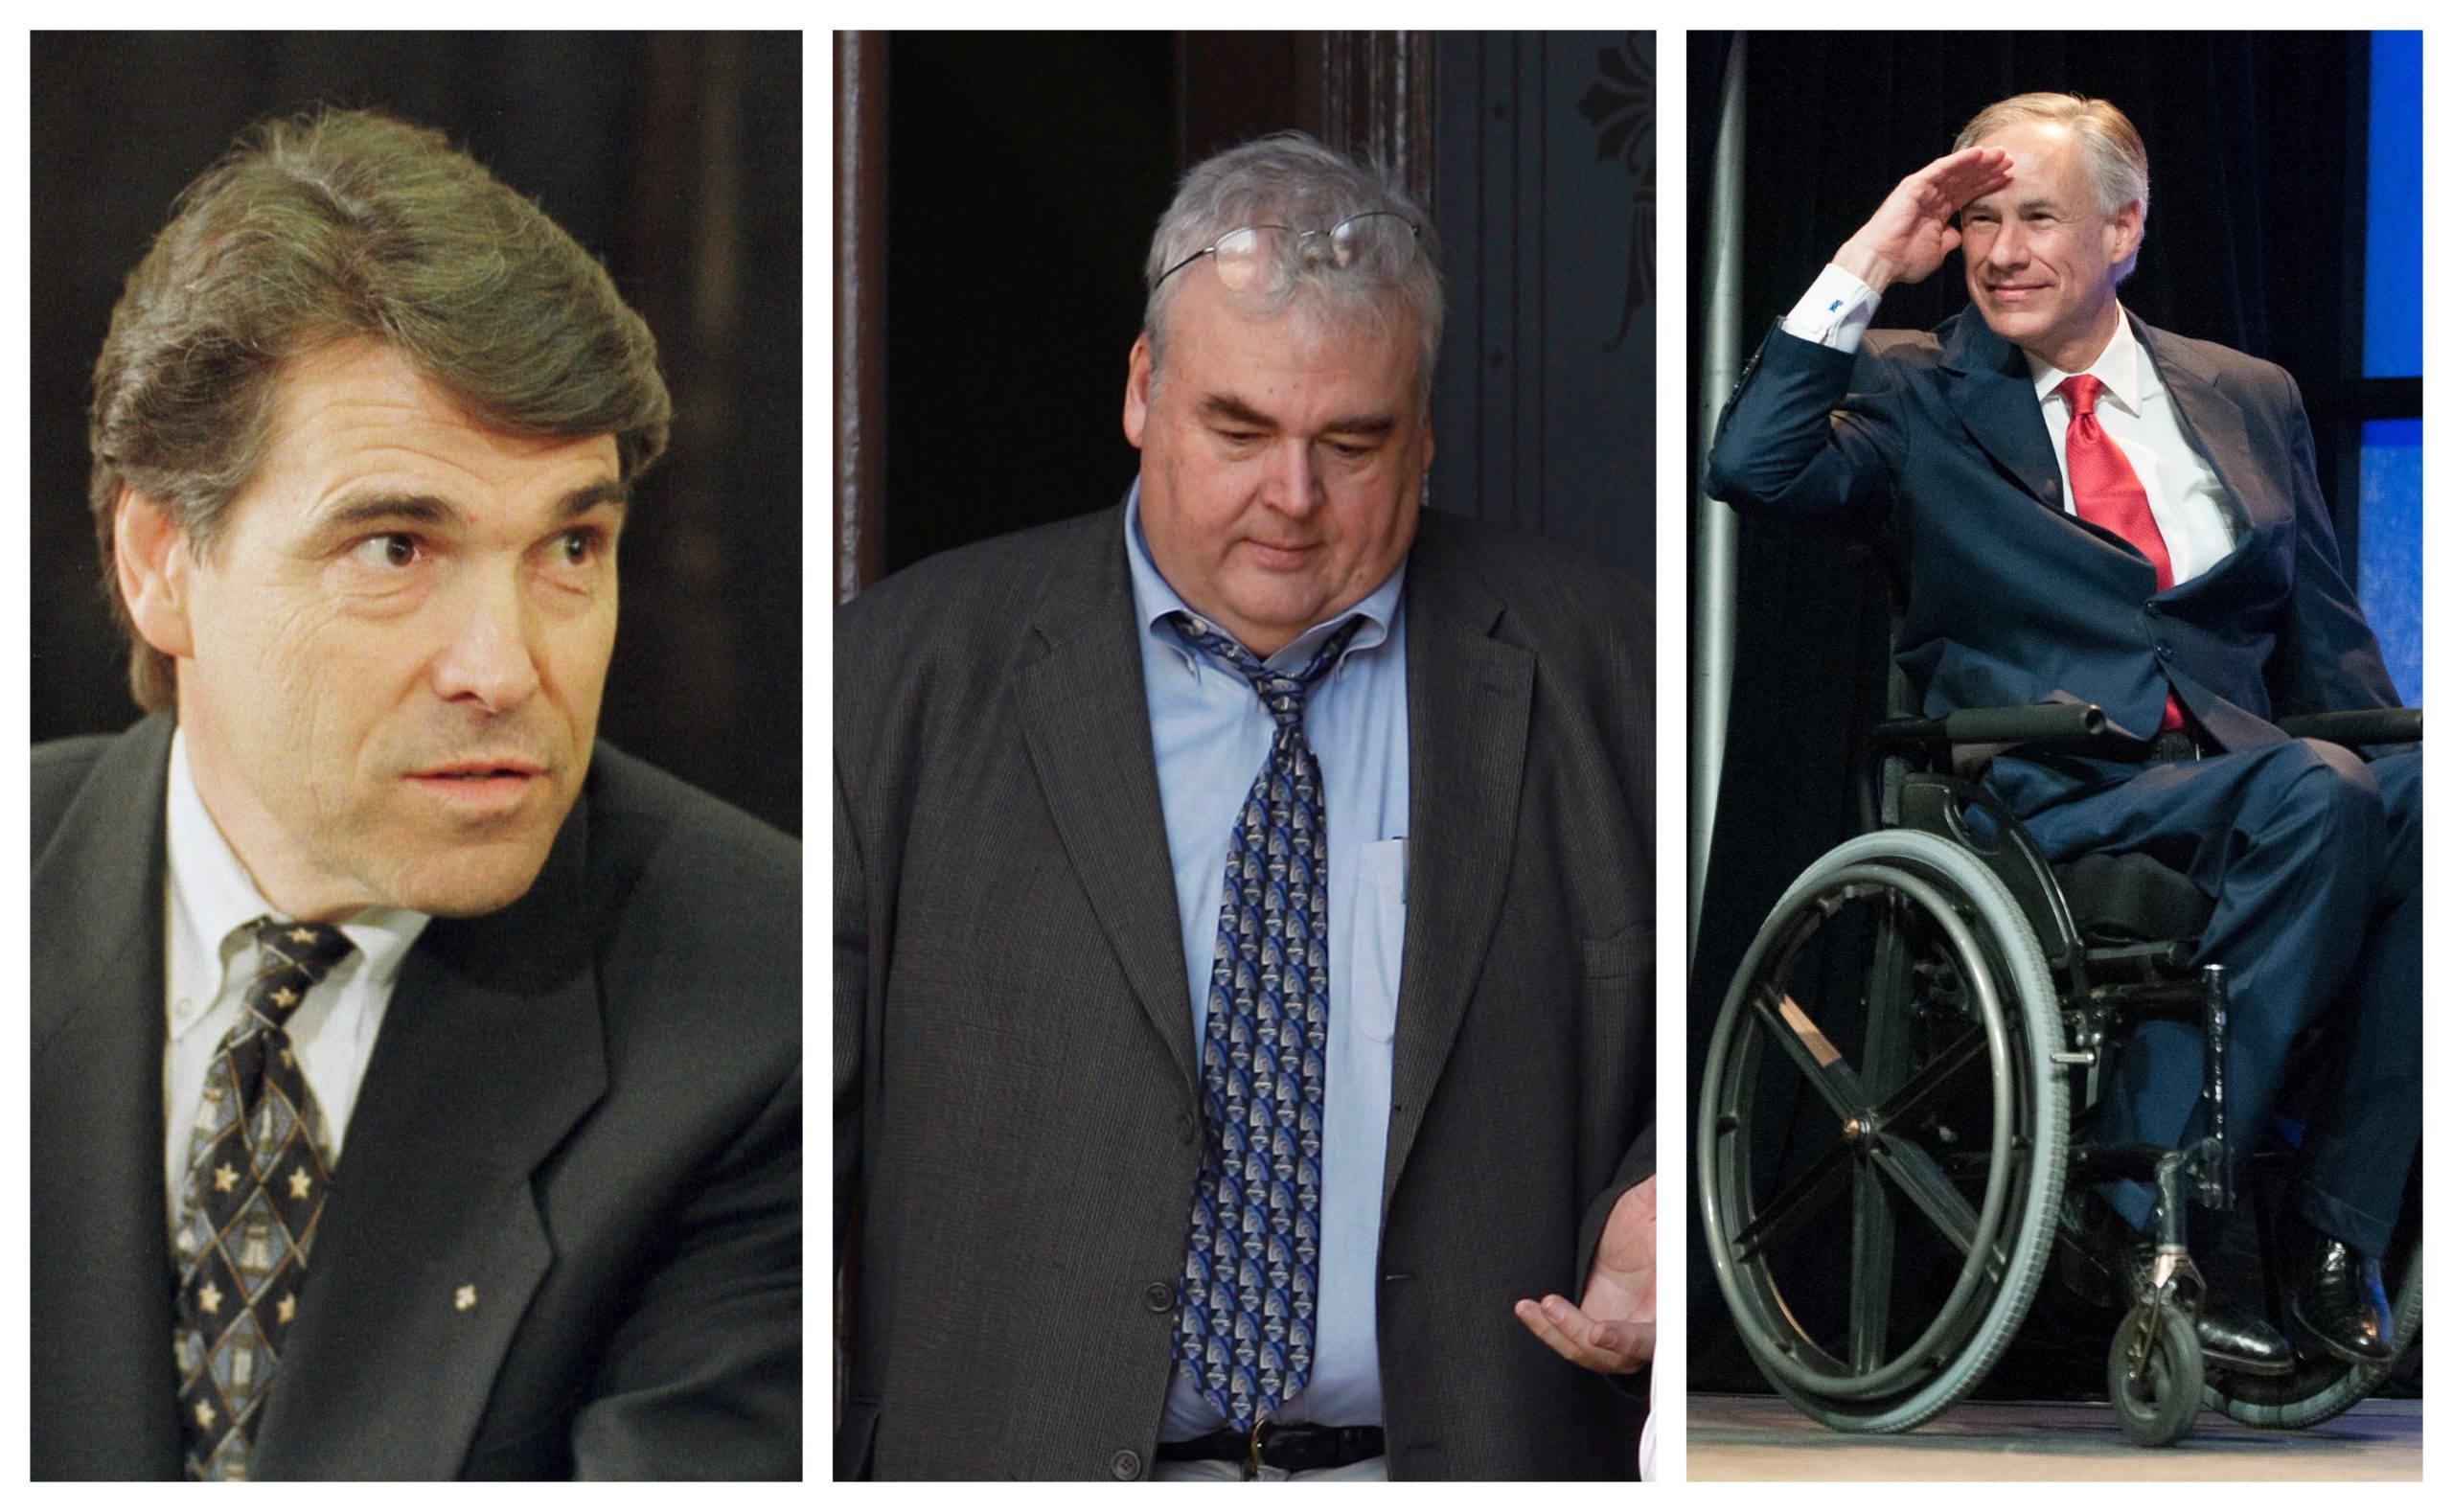 A composite image from left to right showing three men in suits. Abbott is sitting in his wheelchair and saluting, while the other two are seen from the waist up.